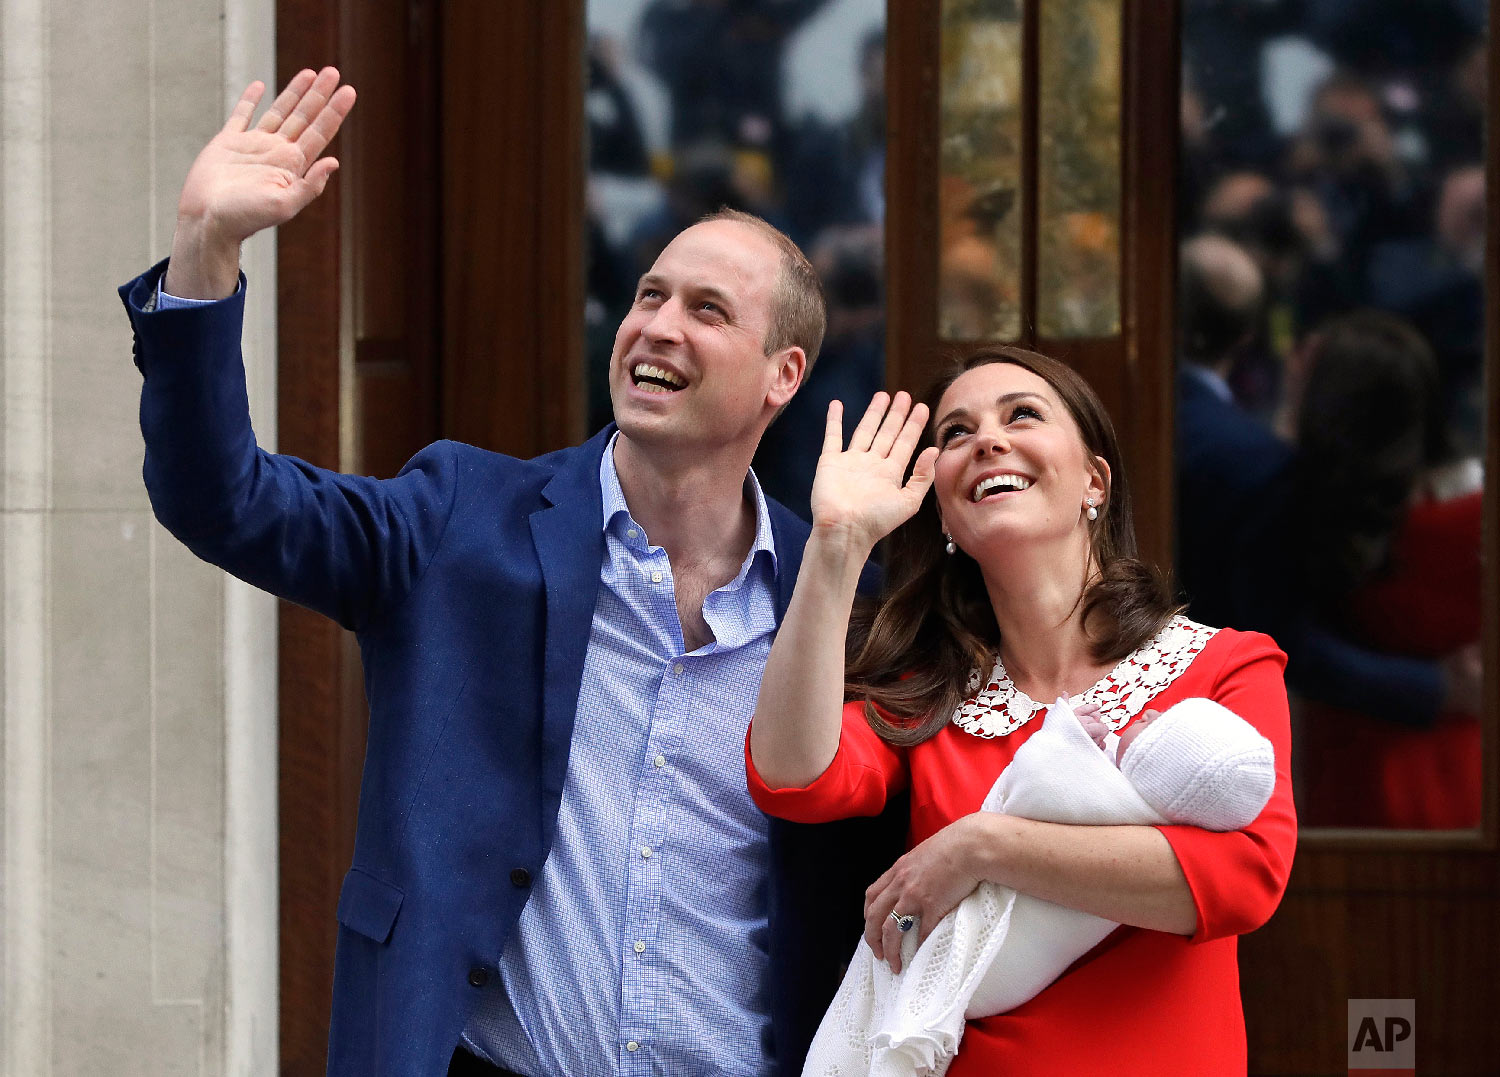  Britain's Prince William and Kate, Duchess of Cambridge, wave as she holds their newborn son outside St. Mary's Hospital in London on April 23, 2018. The baby boy is the third child for Kate and Prince William and fifth in line to the British throne